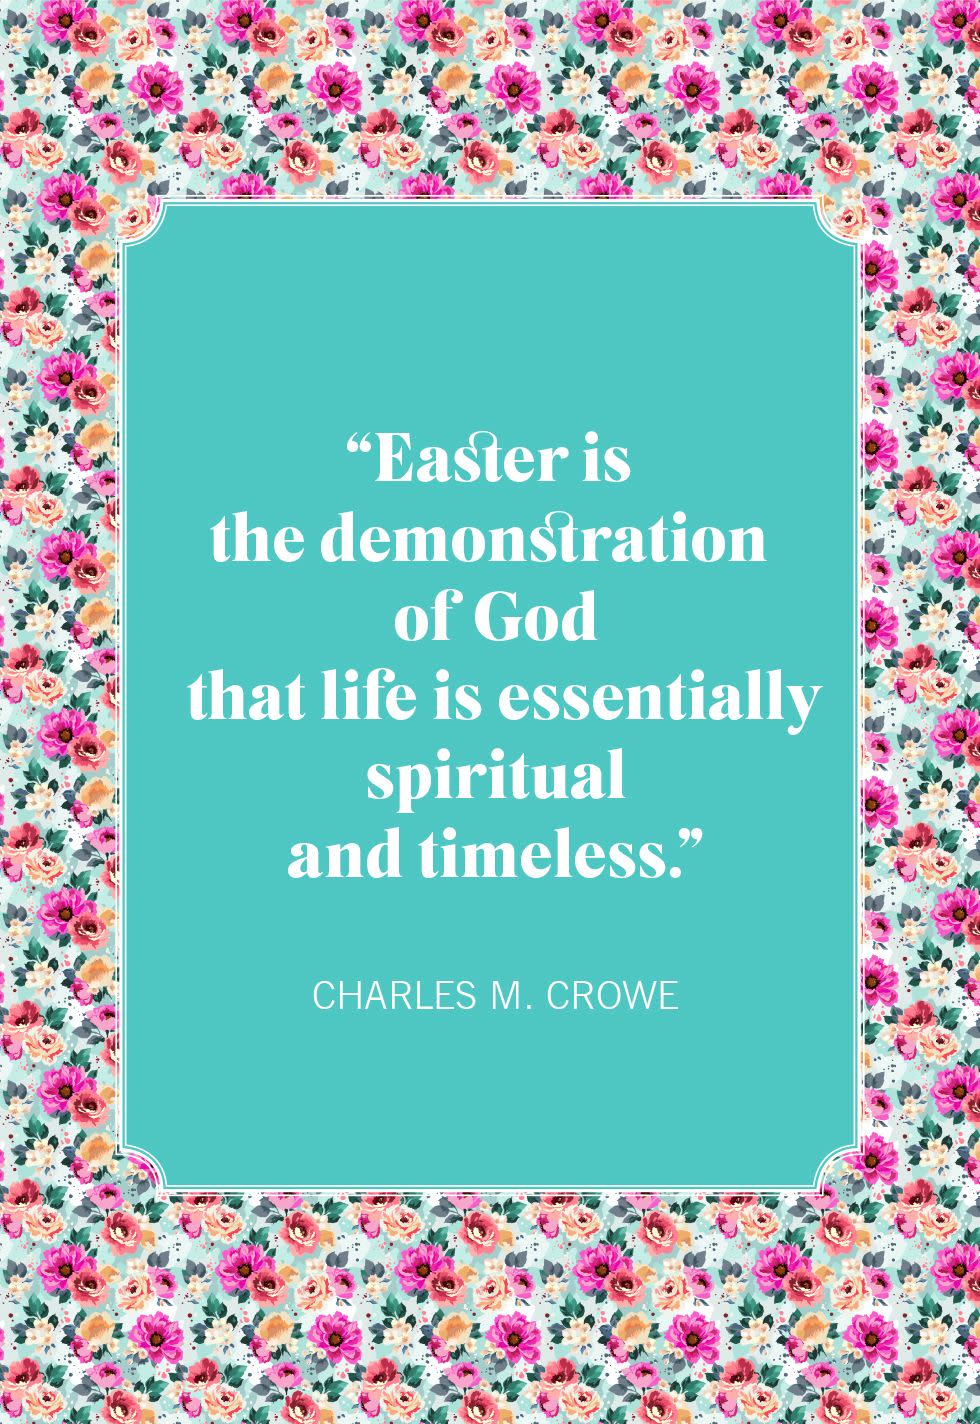 easter quotes charles m crowe